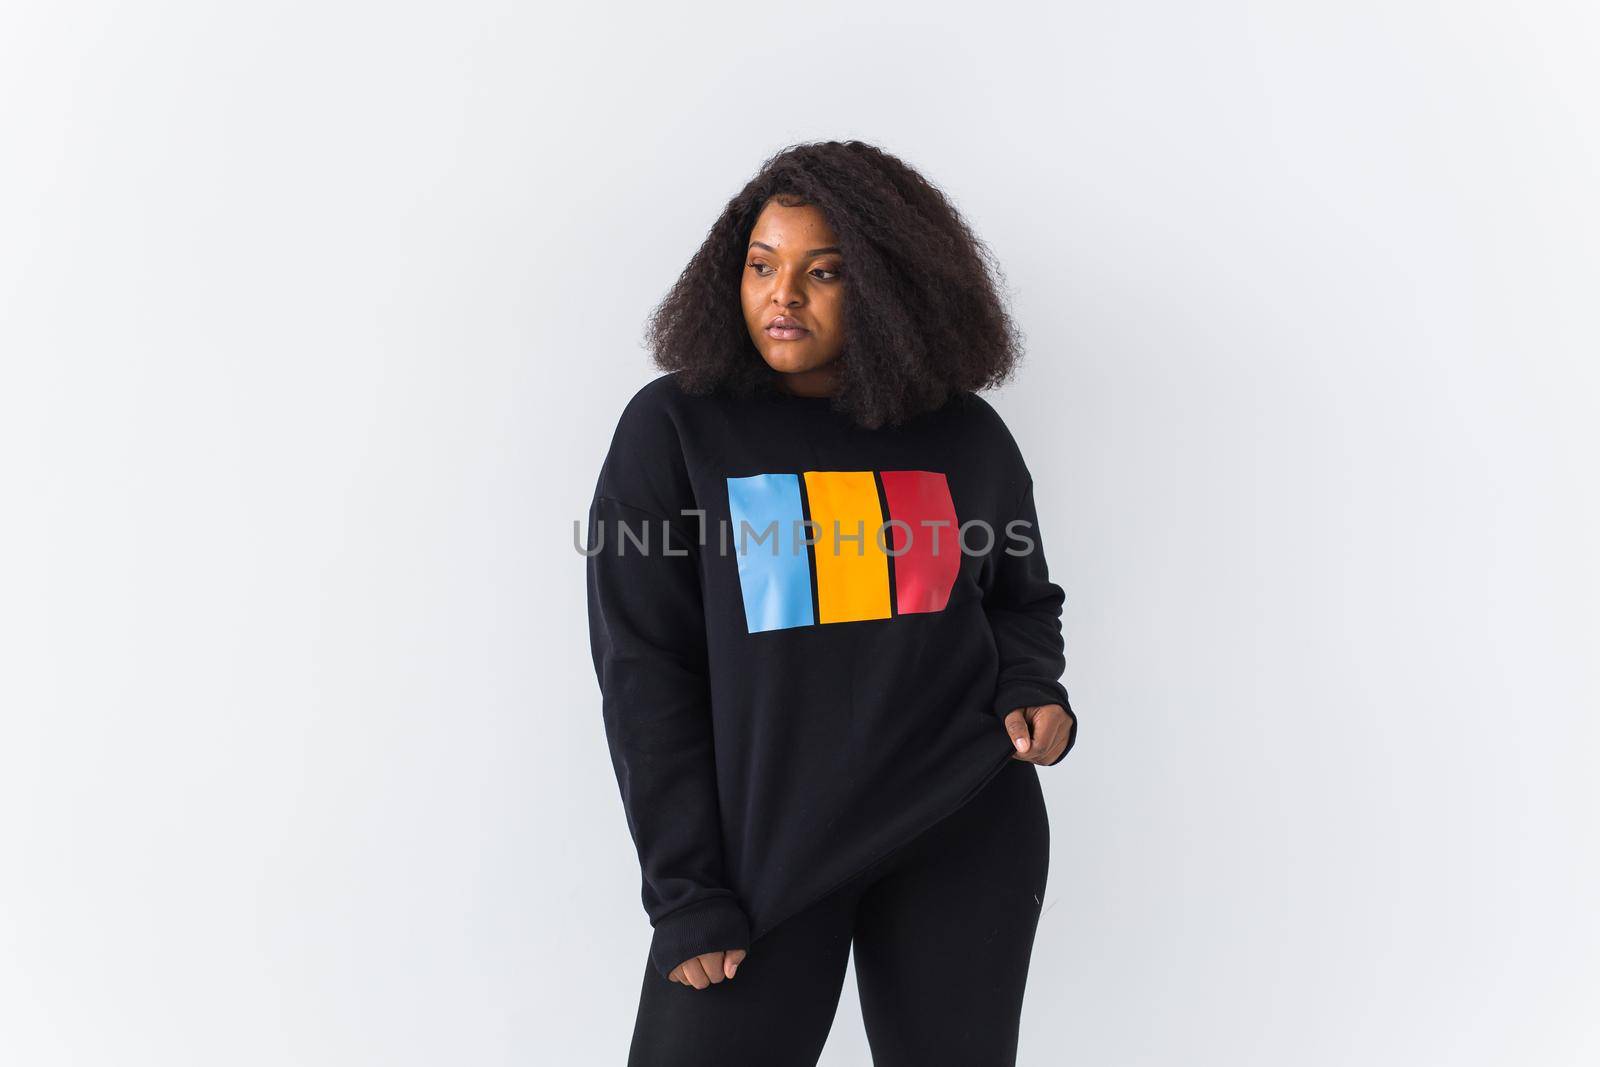 Beautiful African American woman posing in black hoodie on a white background. Fashion with afro hairstyle.